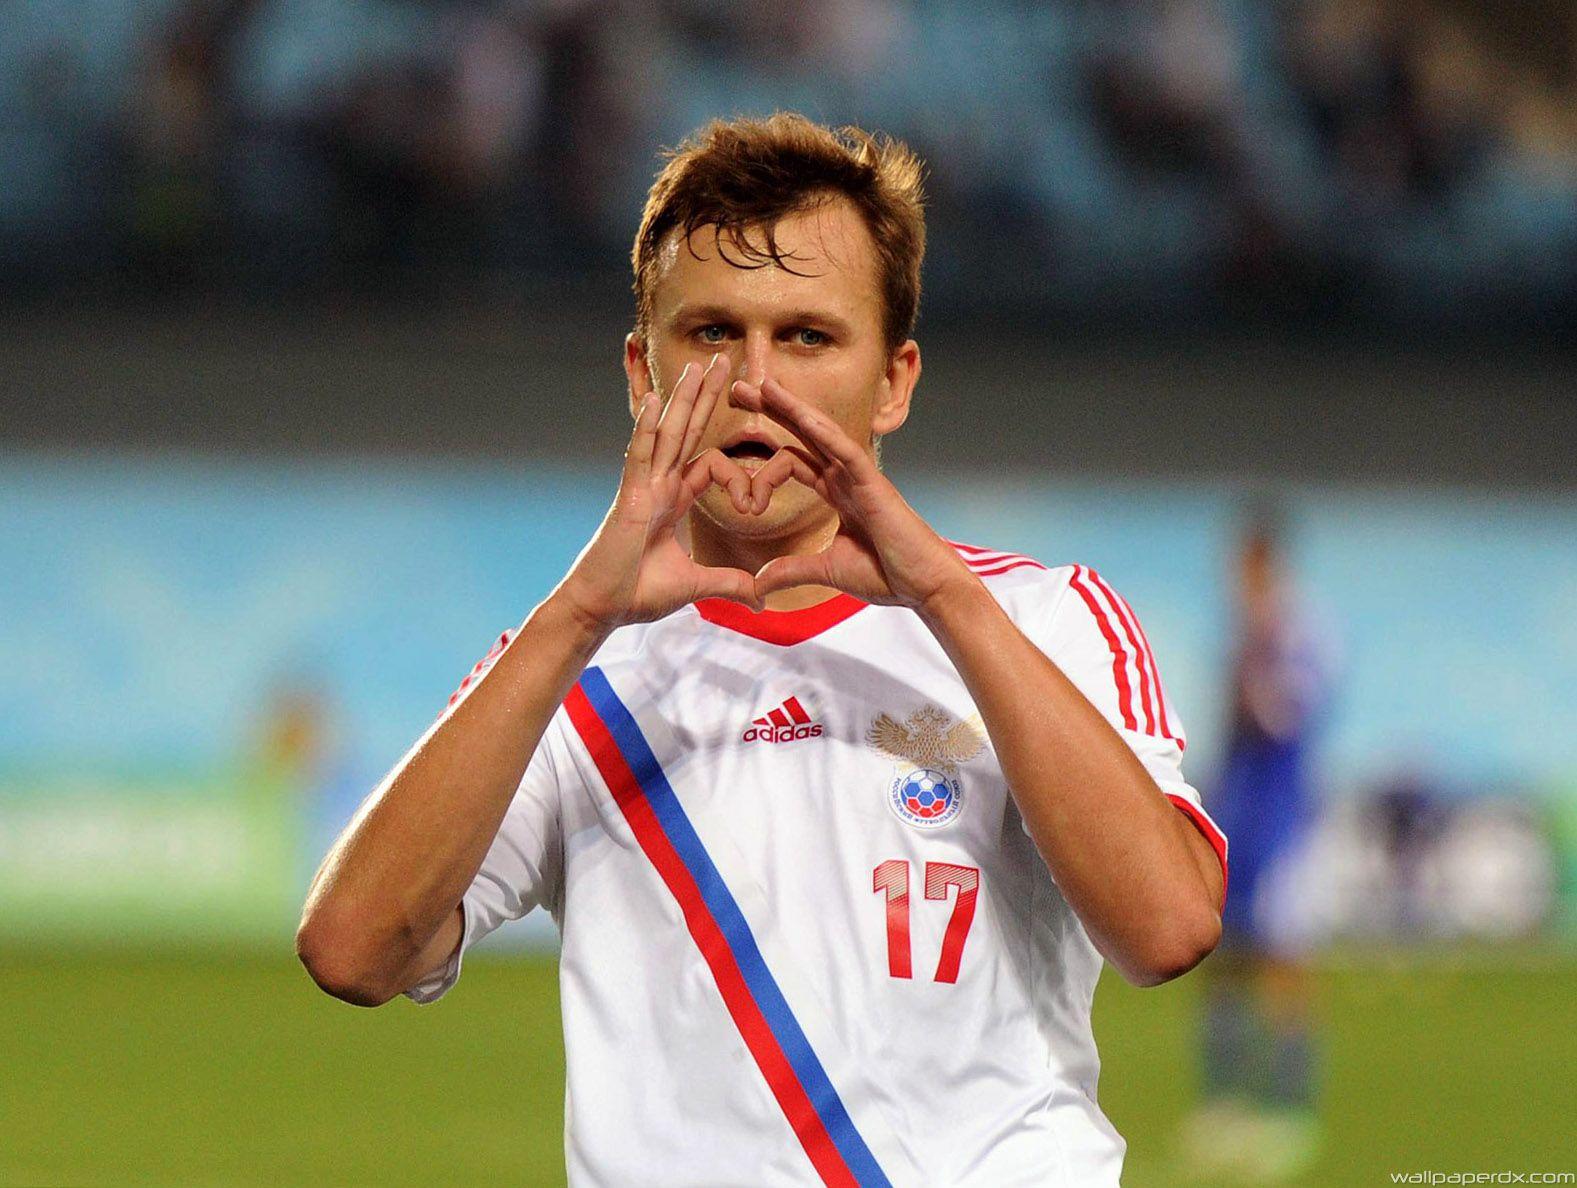 denis cheryshev russian national team player on the field full HD